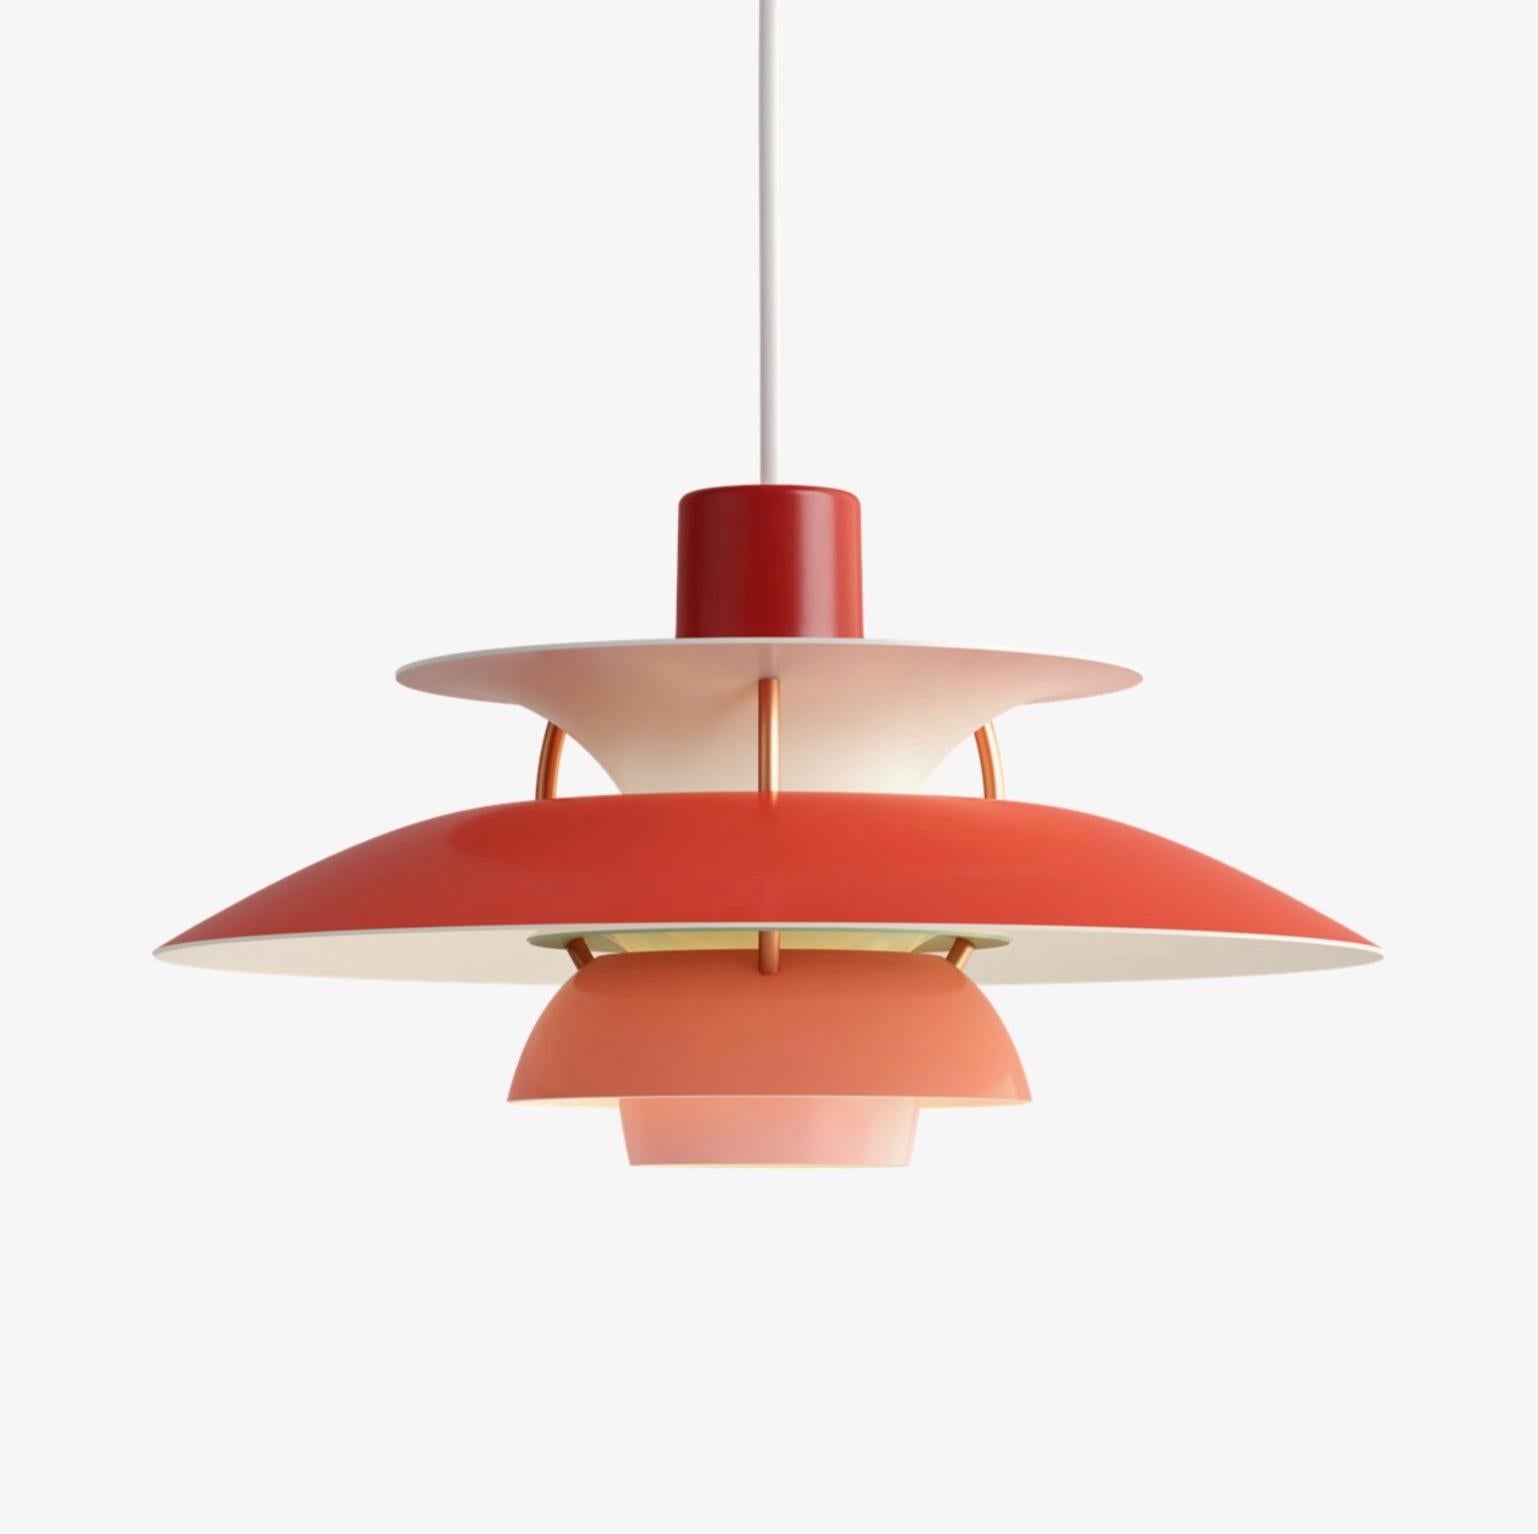 Poul Henningsen PH5 Mini Pendant for Louis Poulsen. Designed 1958, Mini in 2017. New, current production.

Poul Henningsen developed the PH 5 in 1958 in response to constant changes made to the shape and size of incandescent bulbs by bulb